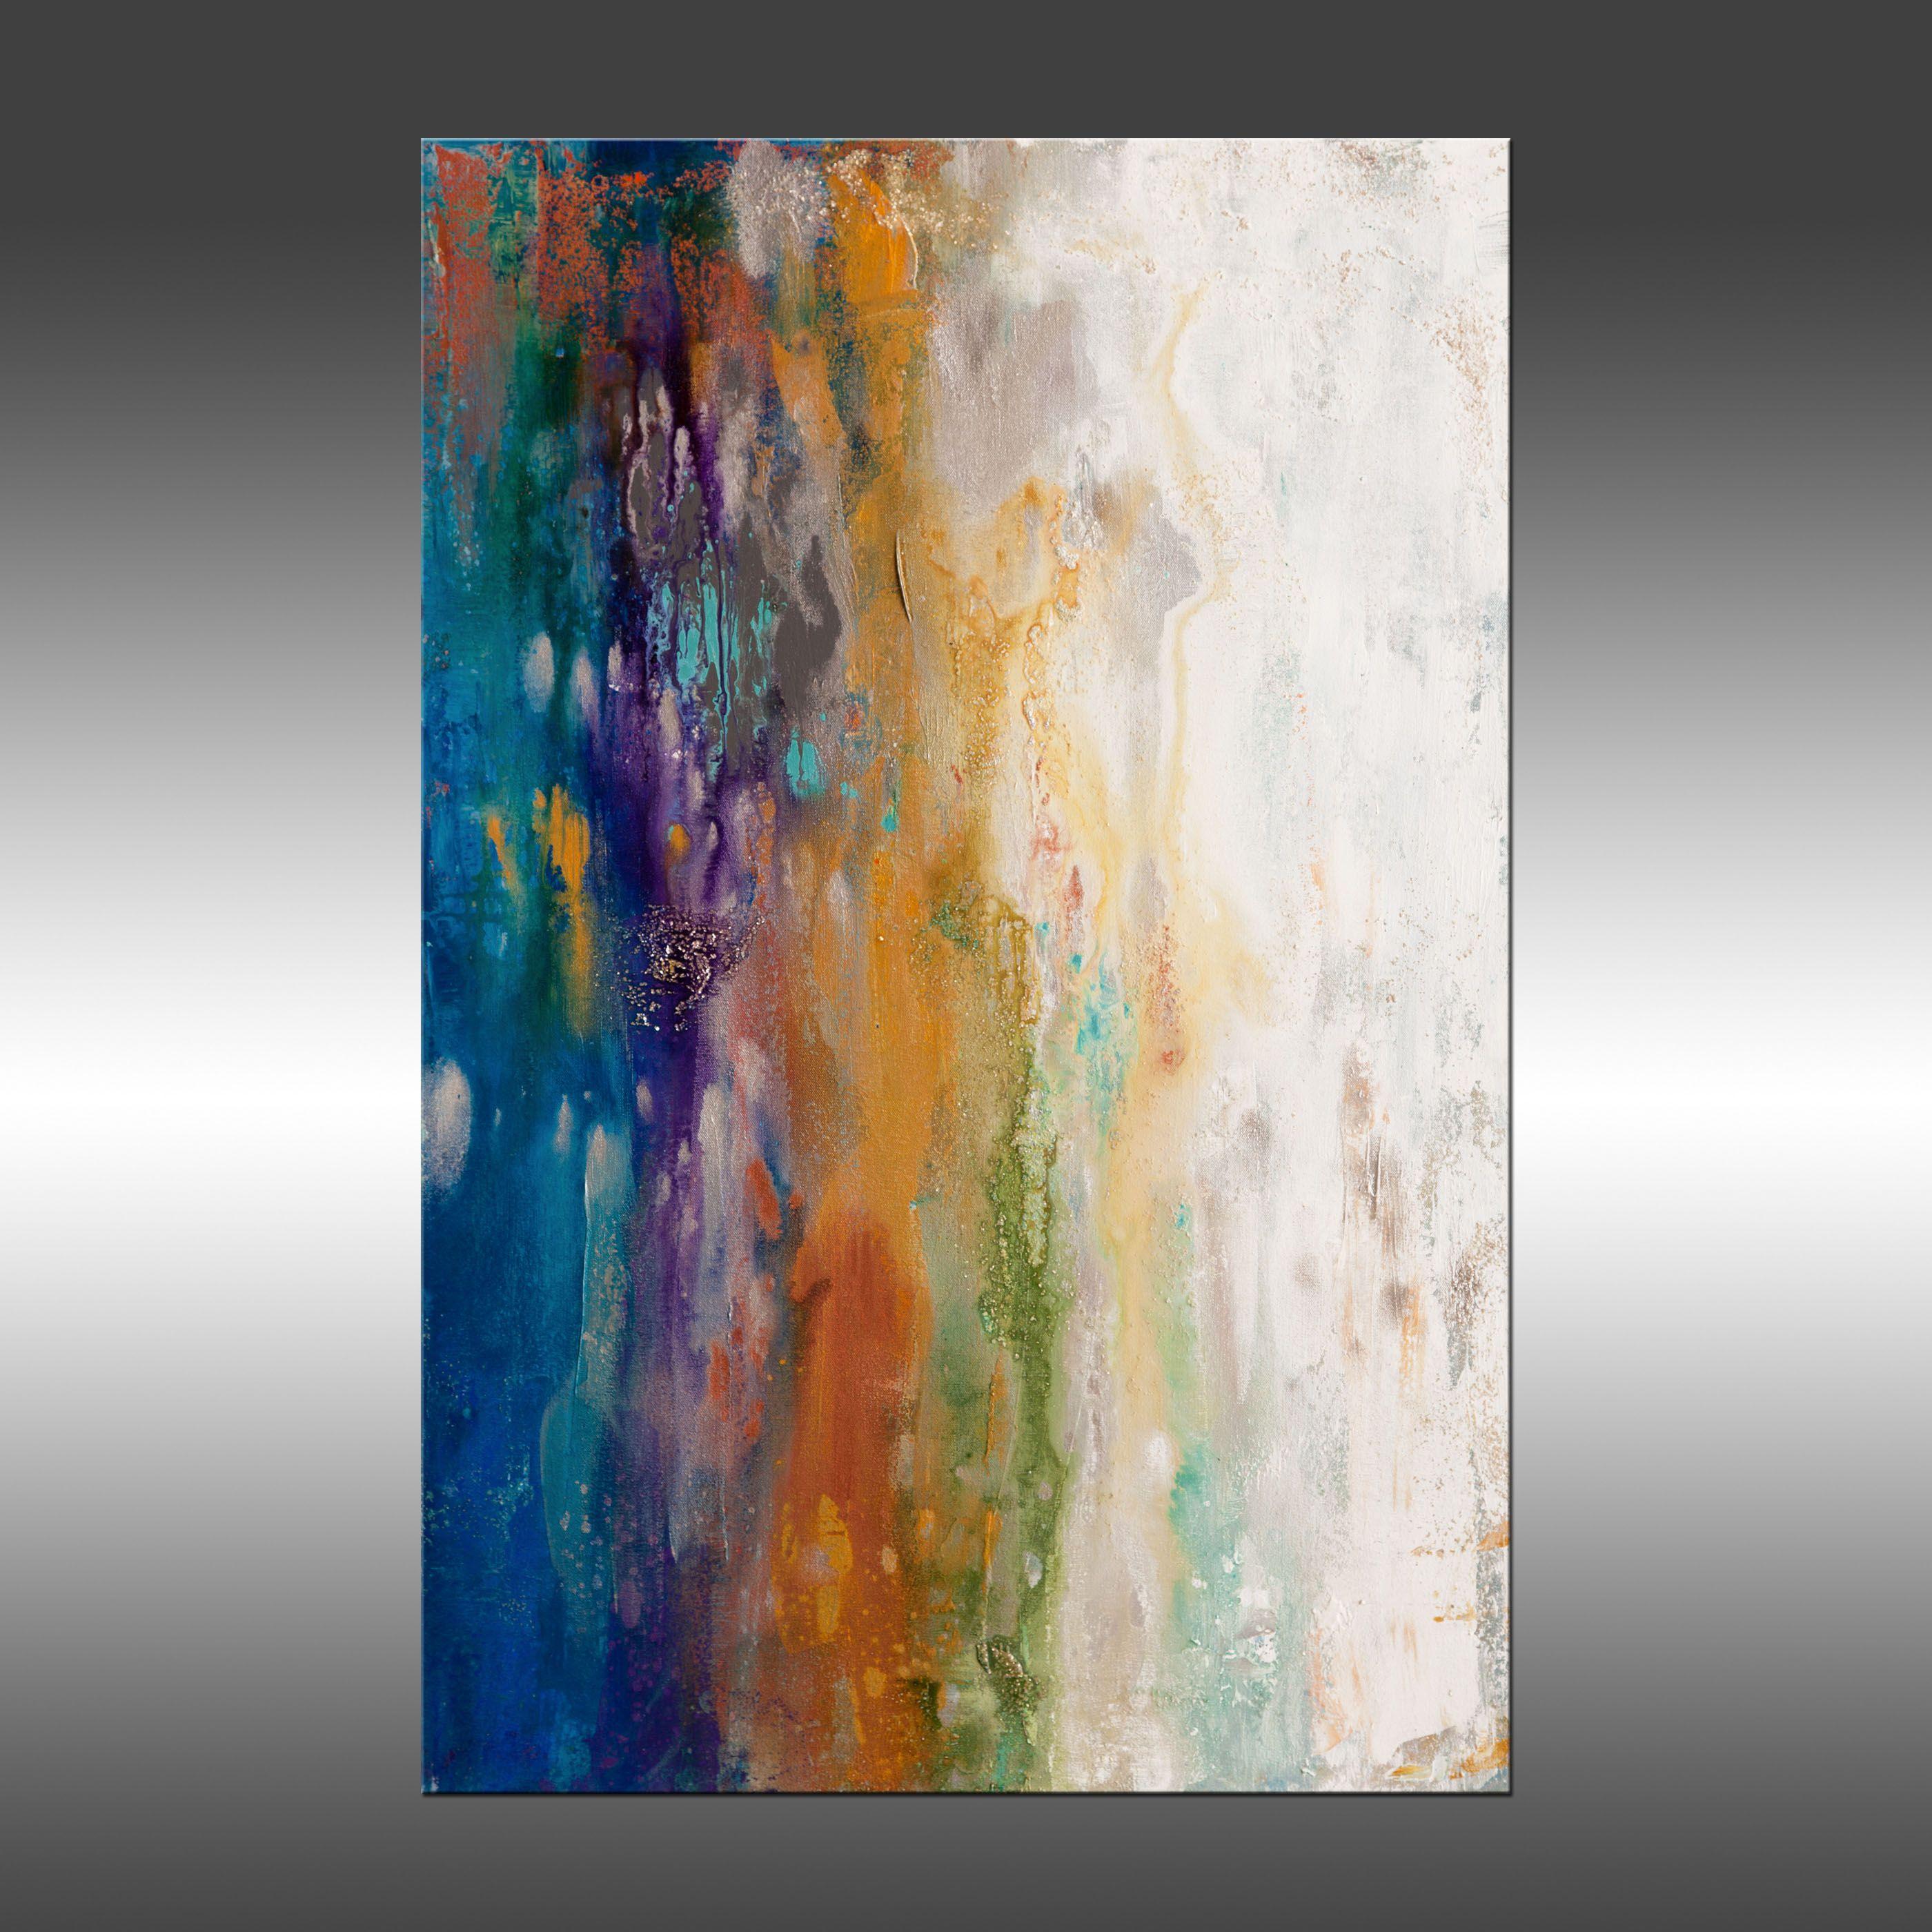 Saltwater 1 is an original painting, created with acrylic paint on gallery-wrapped canvas. It has a width of 36 inches and a height of 24 inches with a depth of 1.5 inches (36x24x1.5). This painting can be hung vertically or horizontally.    The